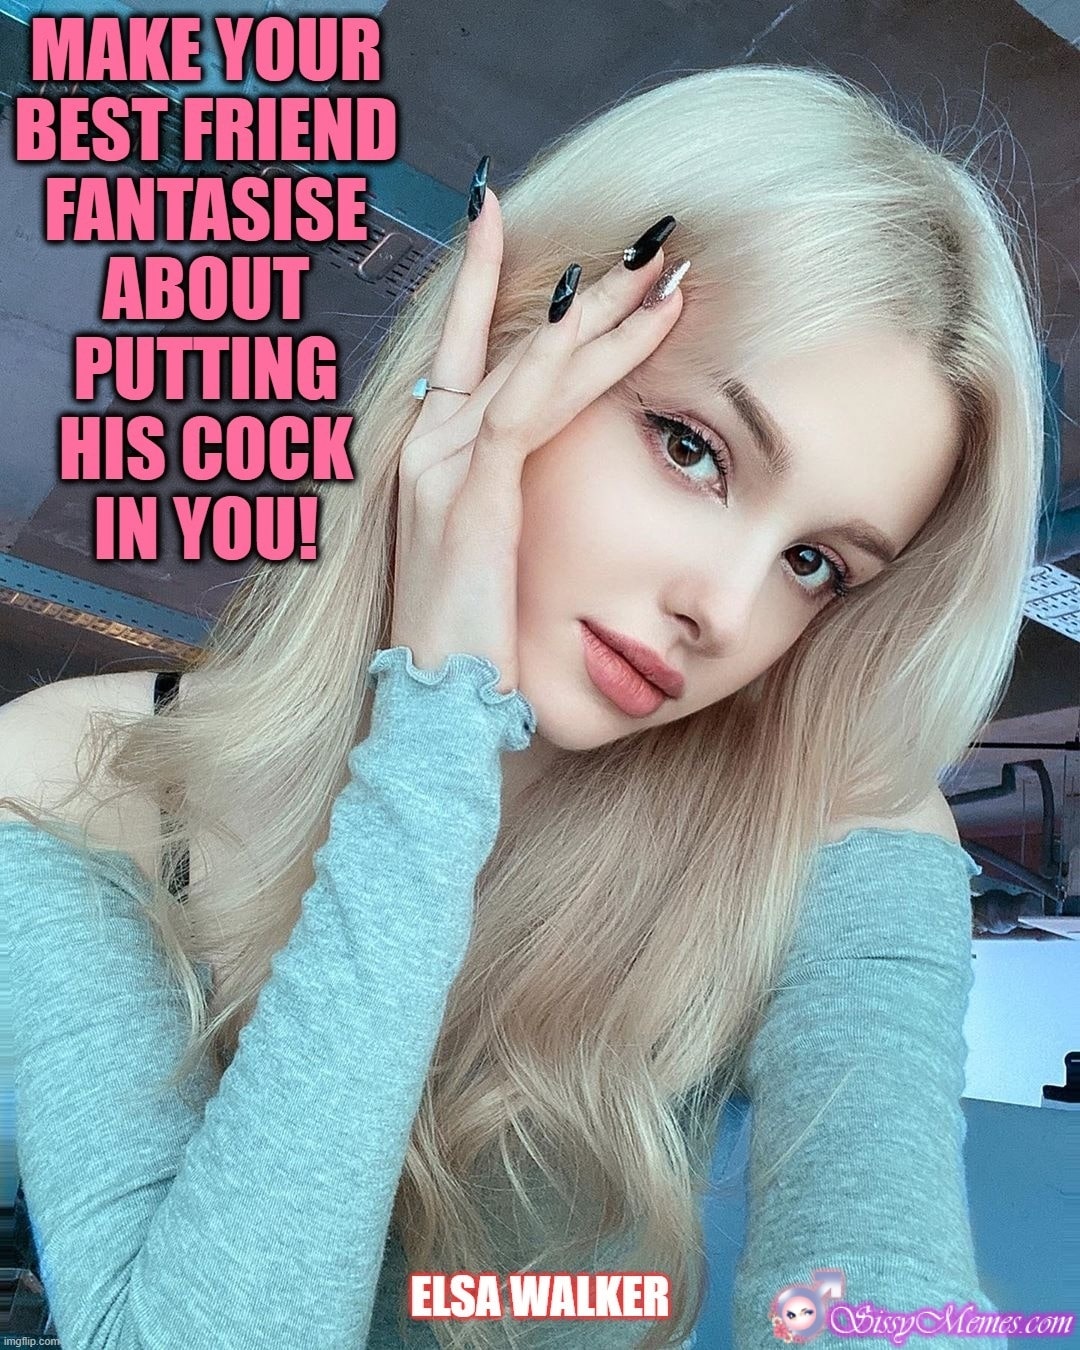 Hypno Feminization Femboy sissy caption: MAKE YOUR BEST FRIEND FANTASISE ABOUT PUTTING HIS COCK IN YOU! ELSA WALKER Beautiful Blonde Sissygirl Dreams of Cocks